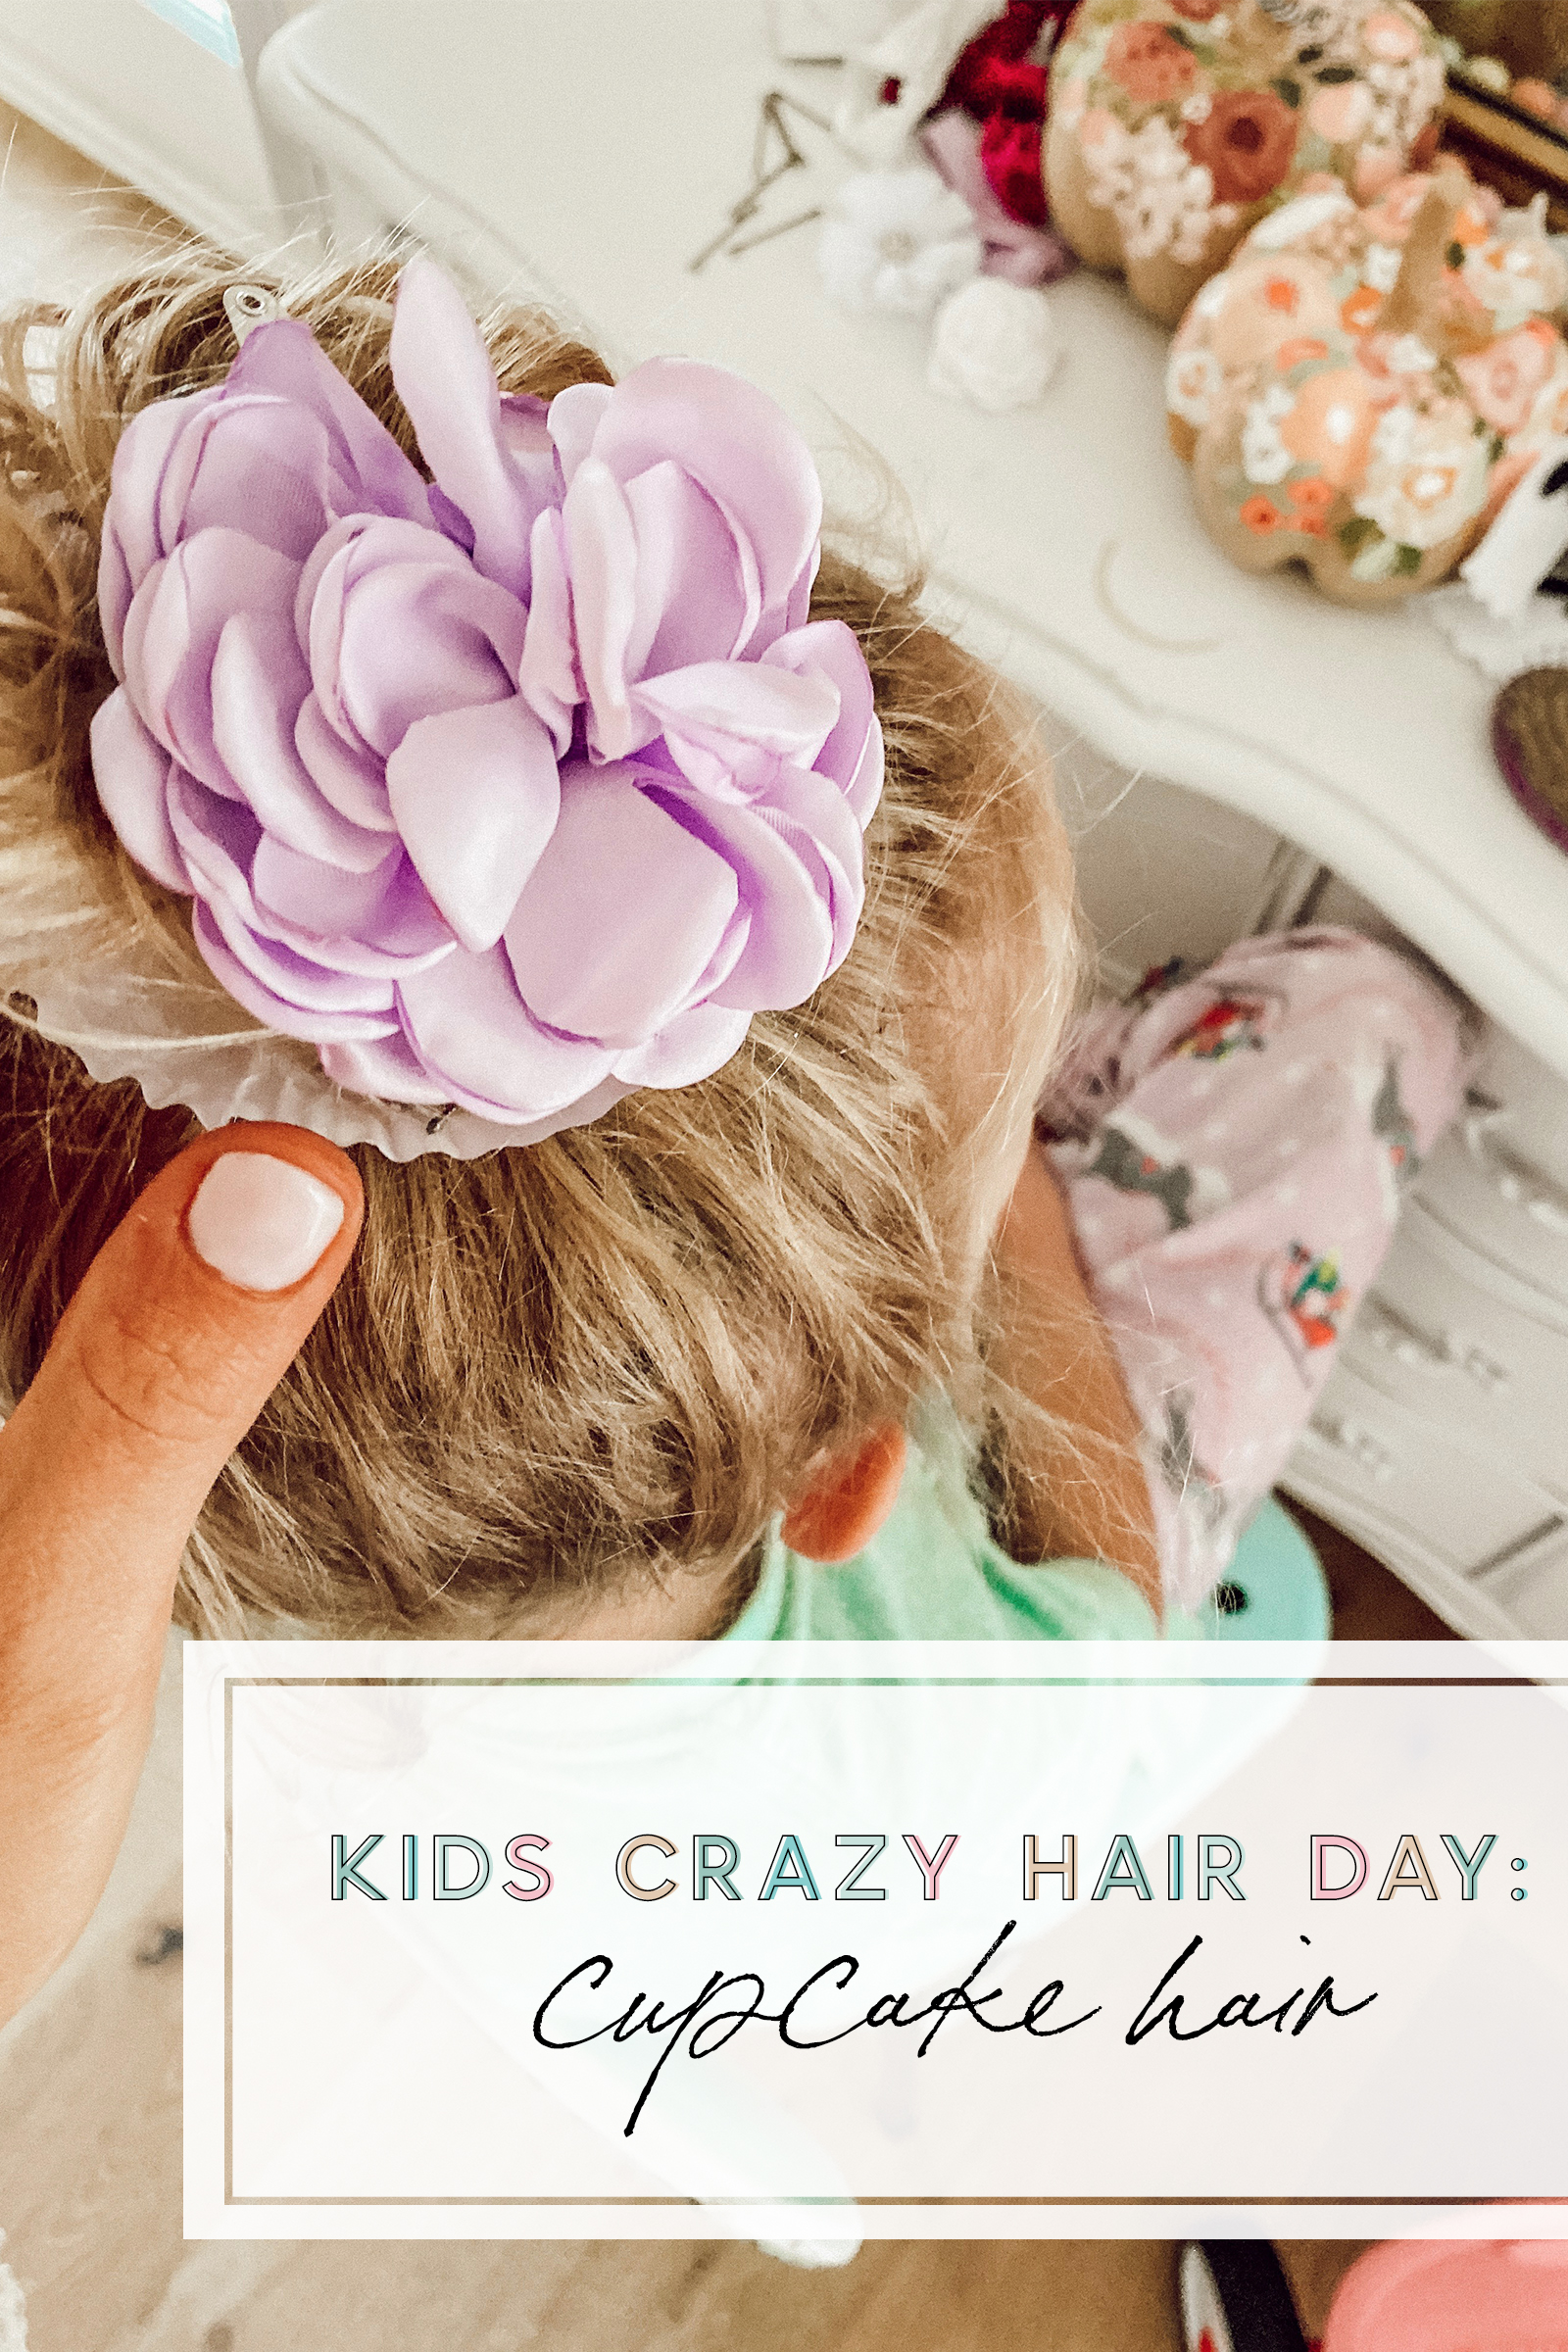 Crazy Hair Day: Cupcake Hair & more ideas - Casey Wiegand of The